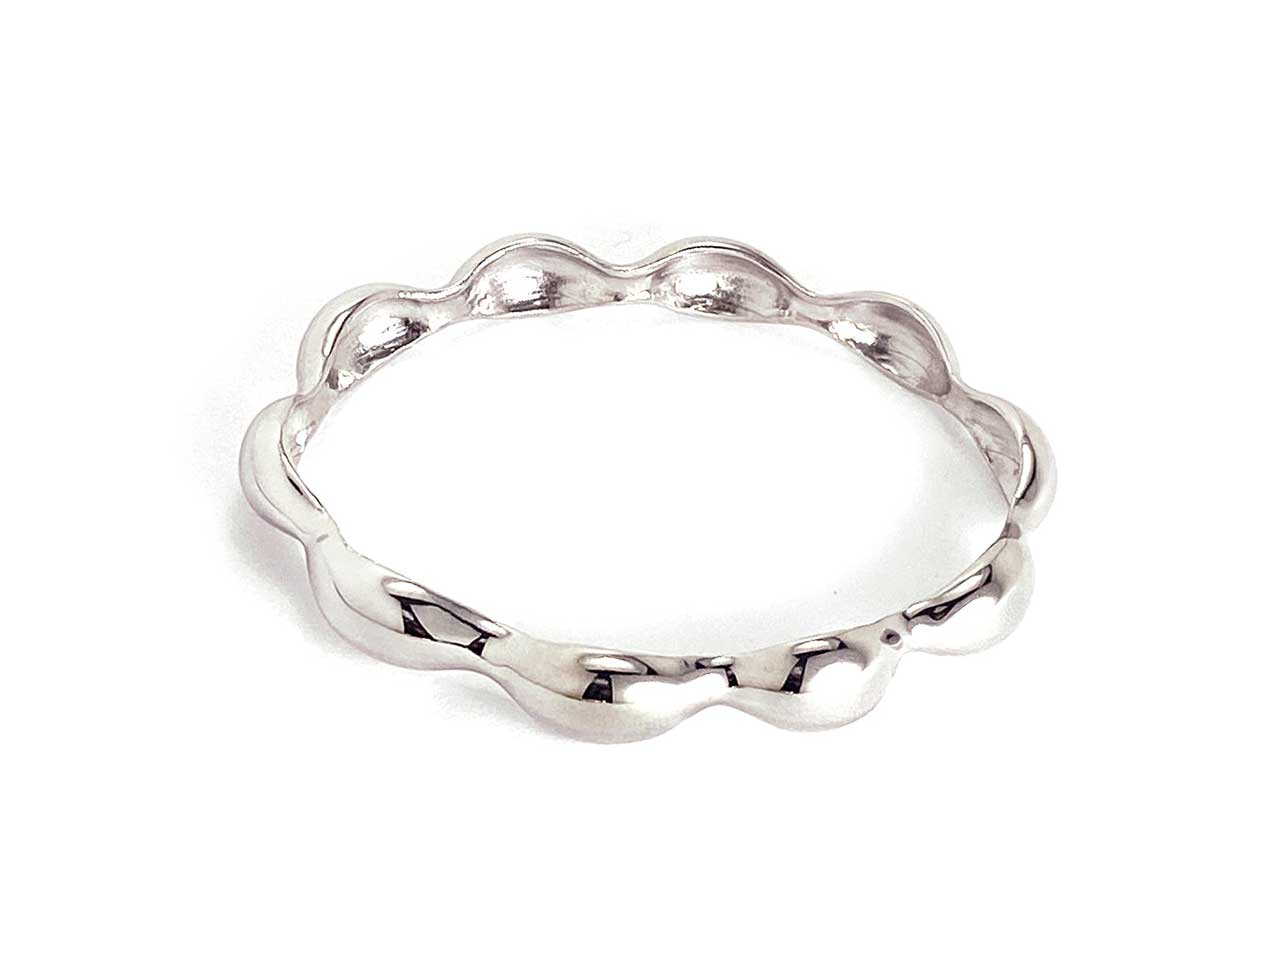 A silver jewellery bangle from Canadian brand Biko.